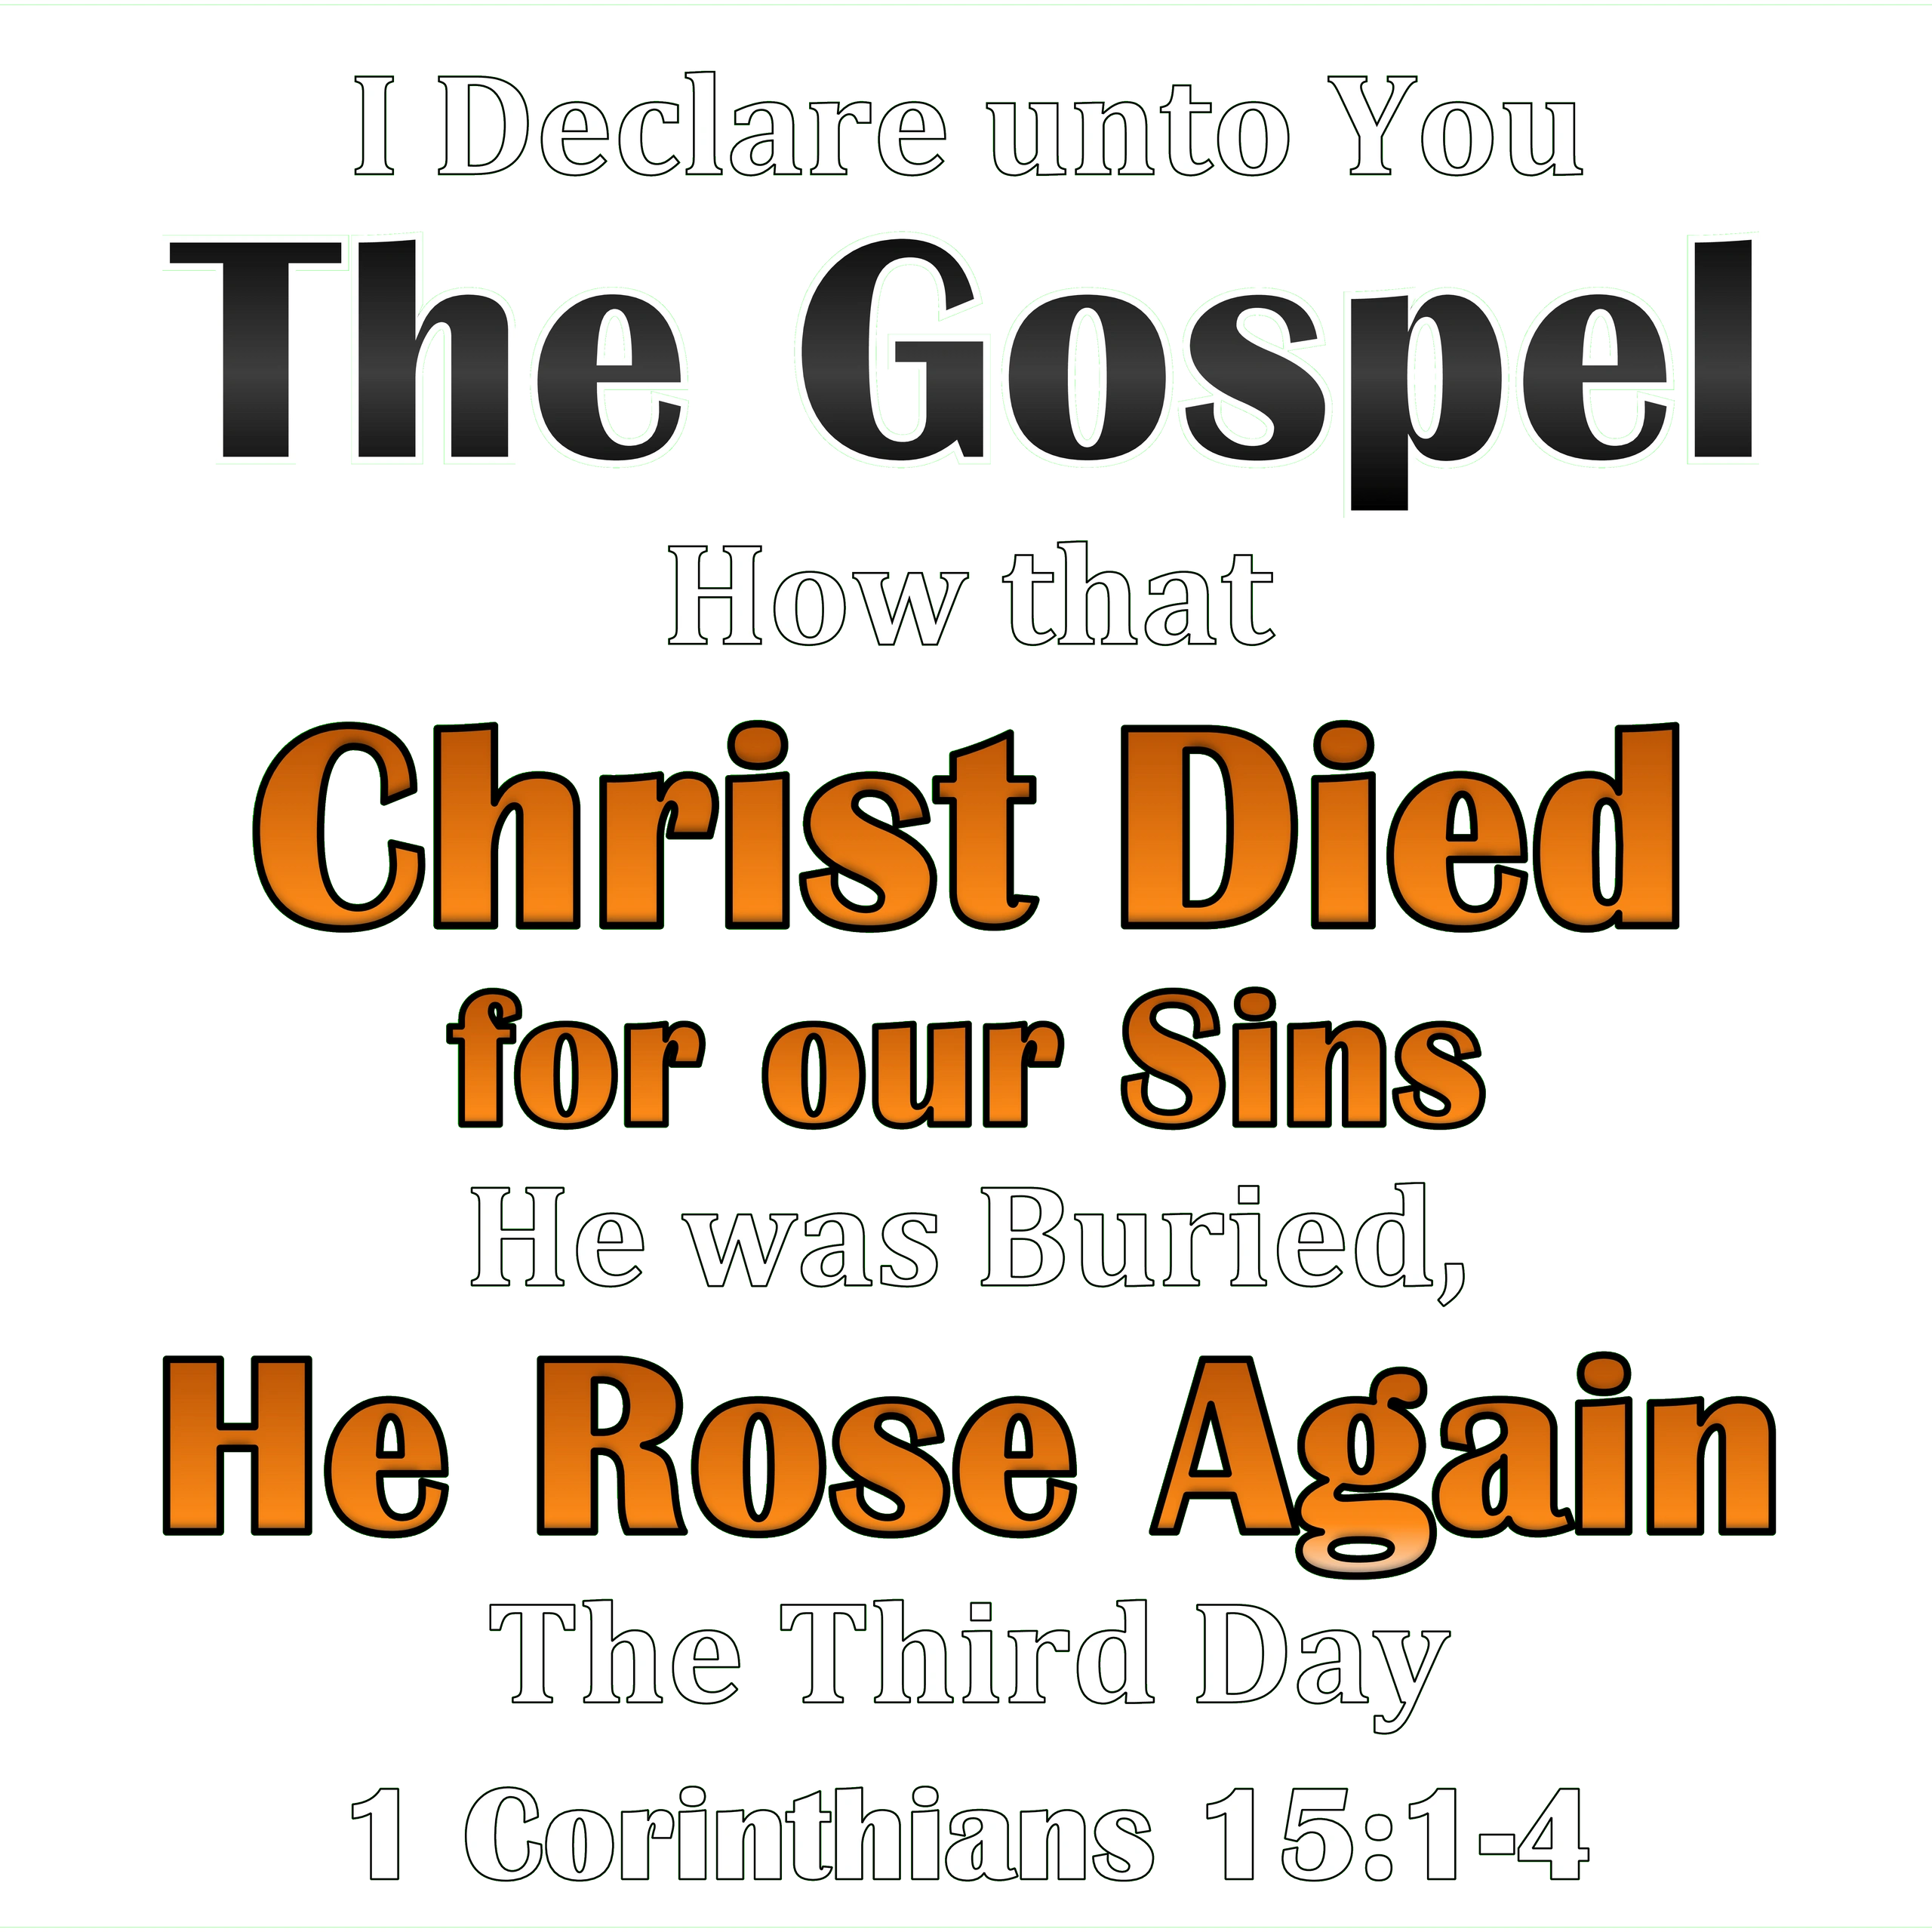 I Declare Unto You 
The Gospel
Christ Died for our Sins
He was Buried,
He Rose Again
The Third Day